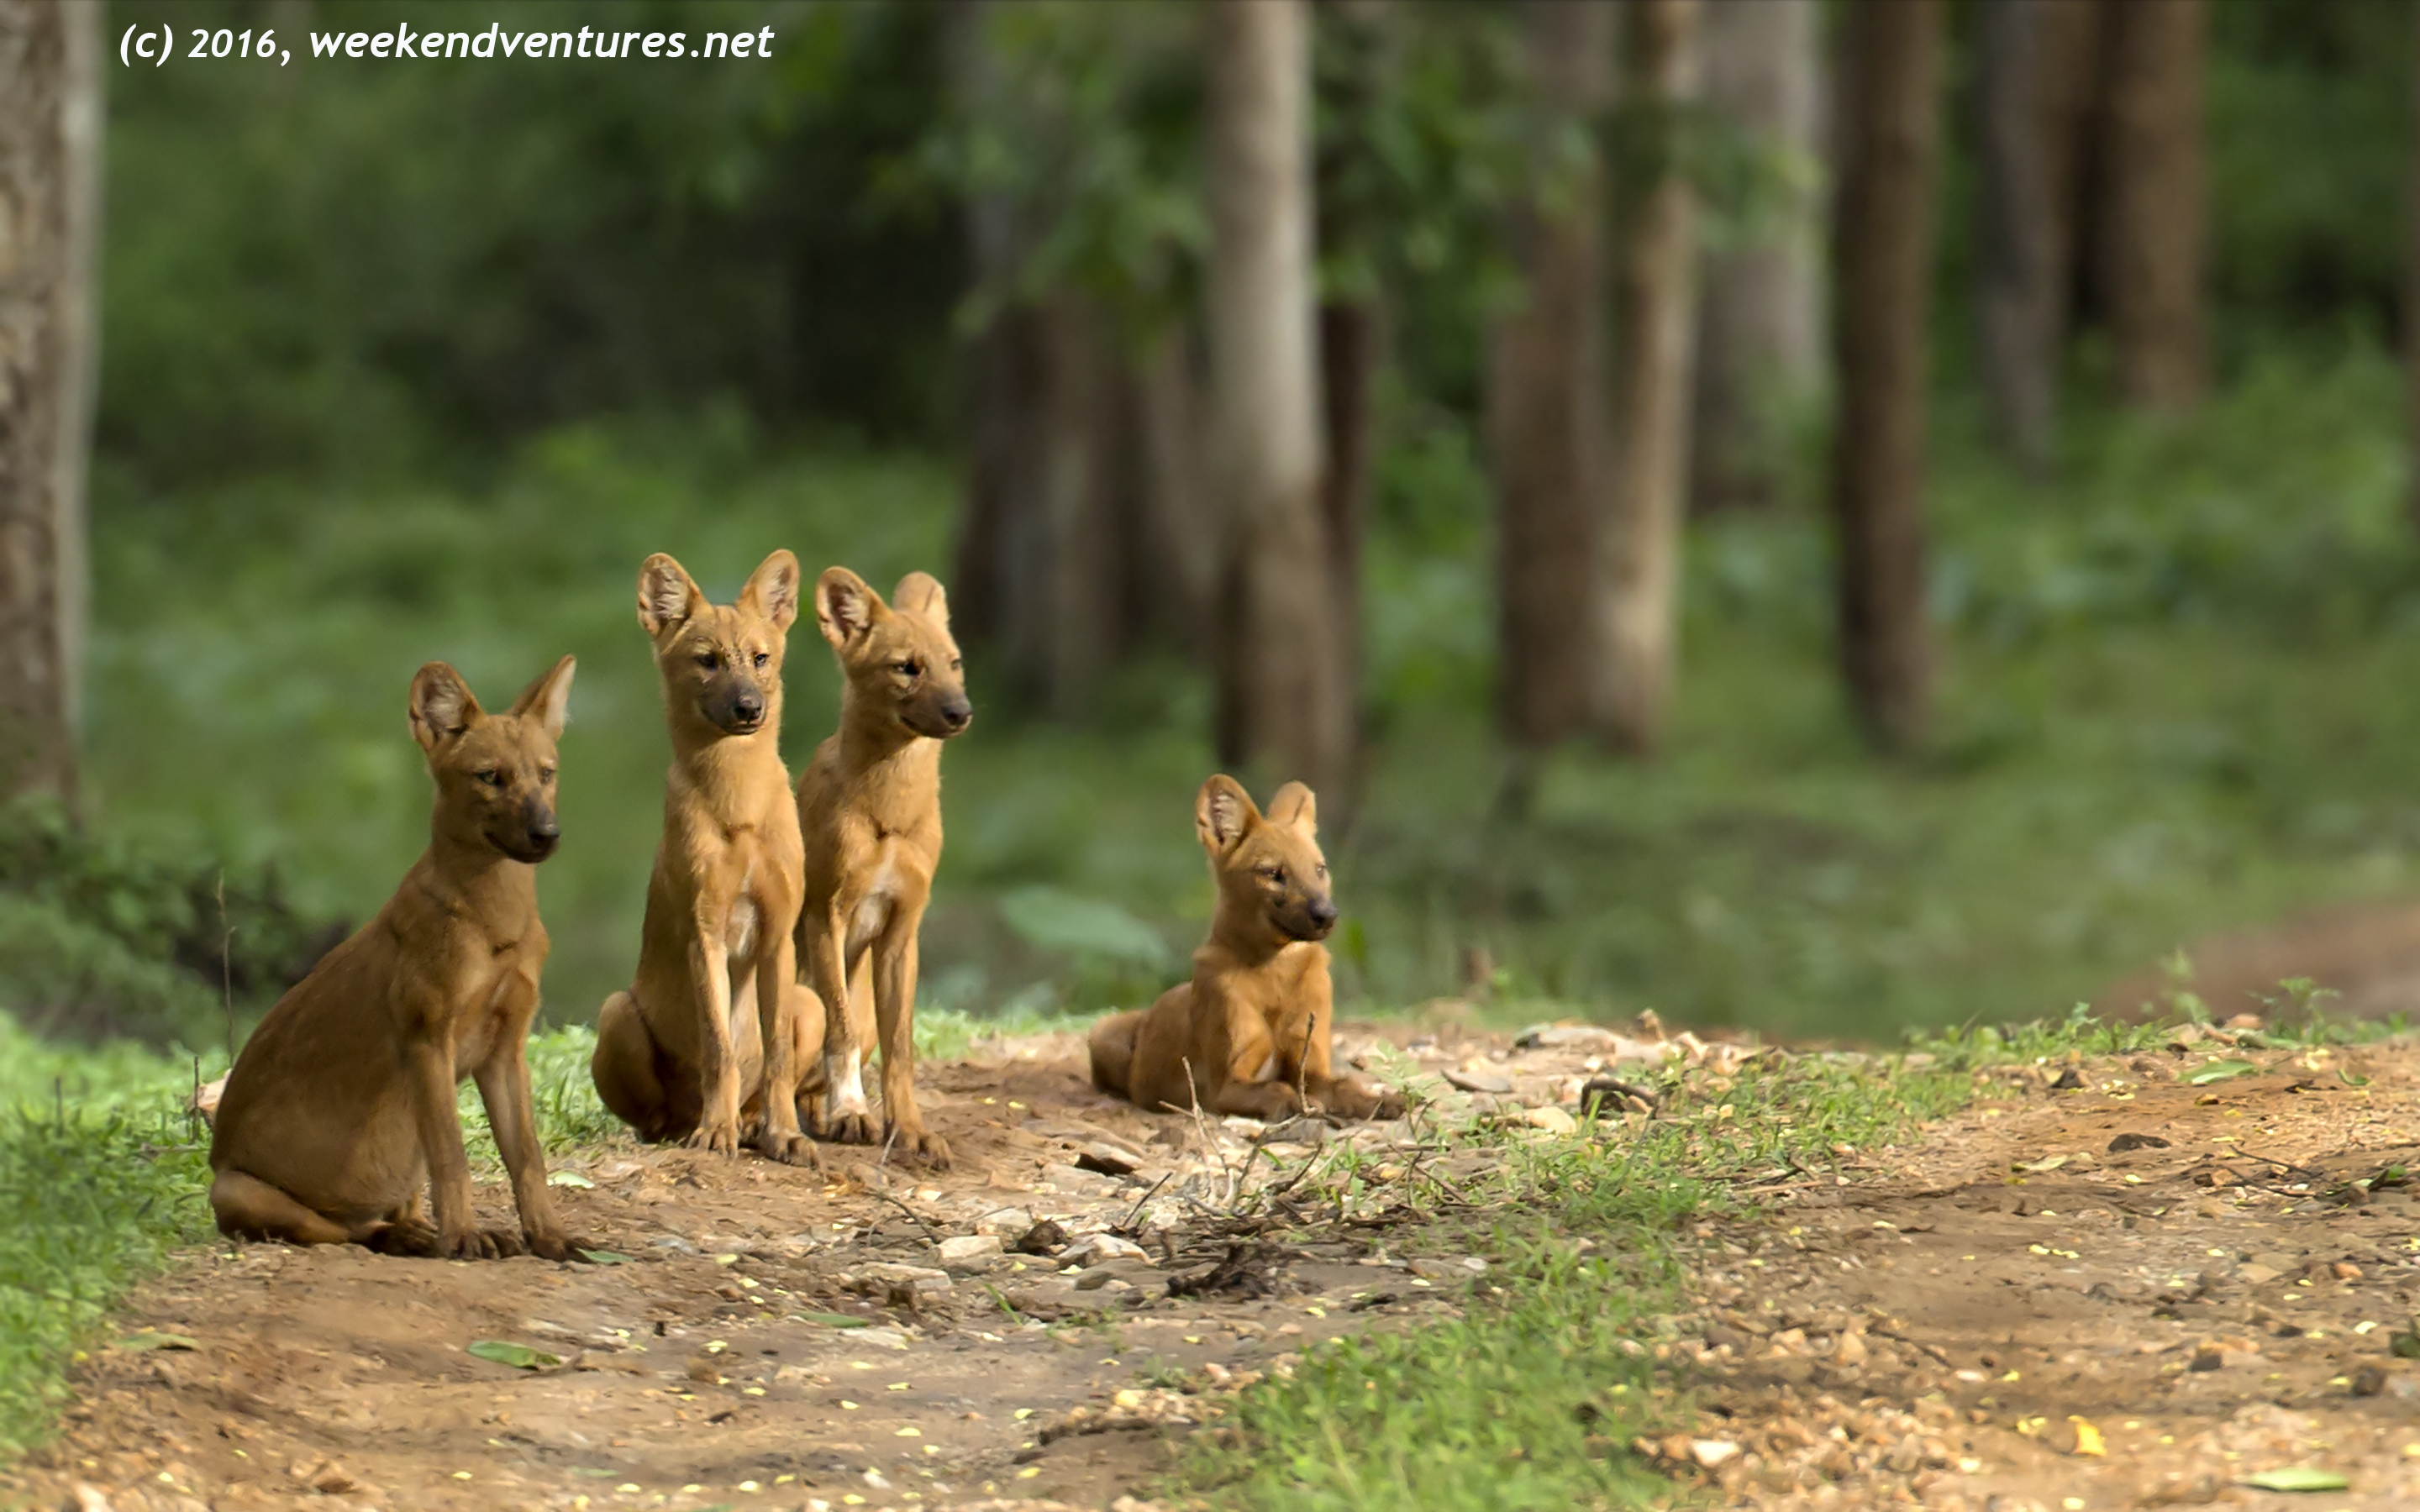 A pack of dholes watching a potential prey